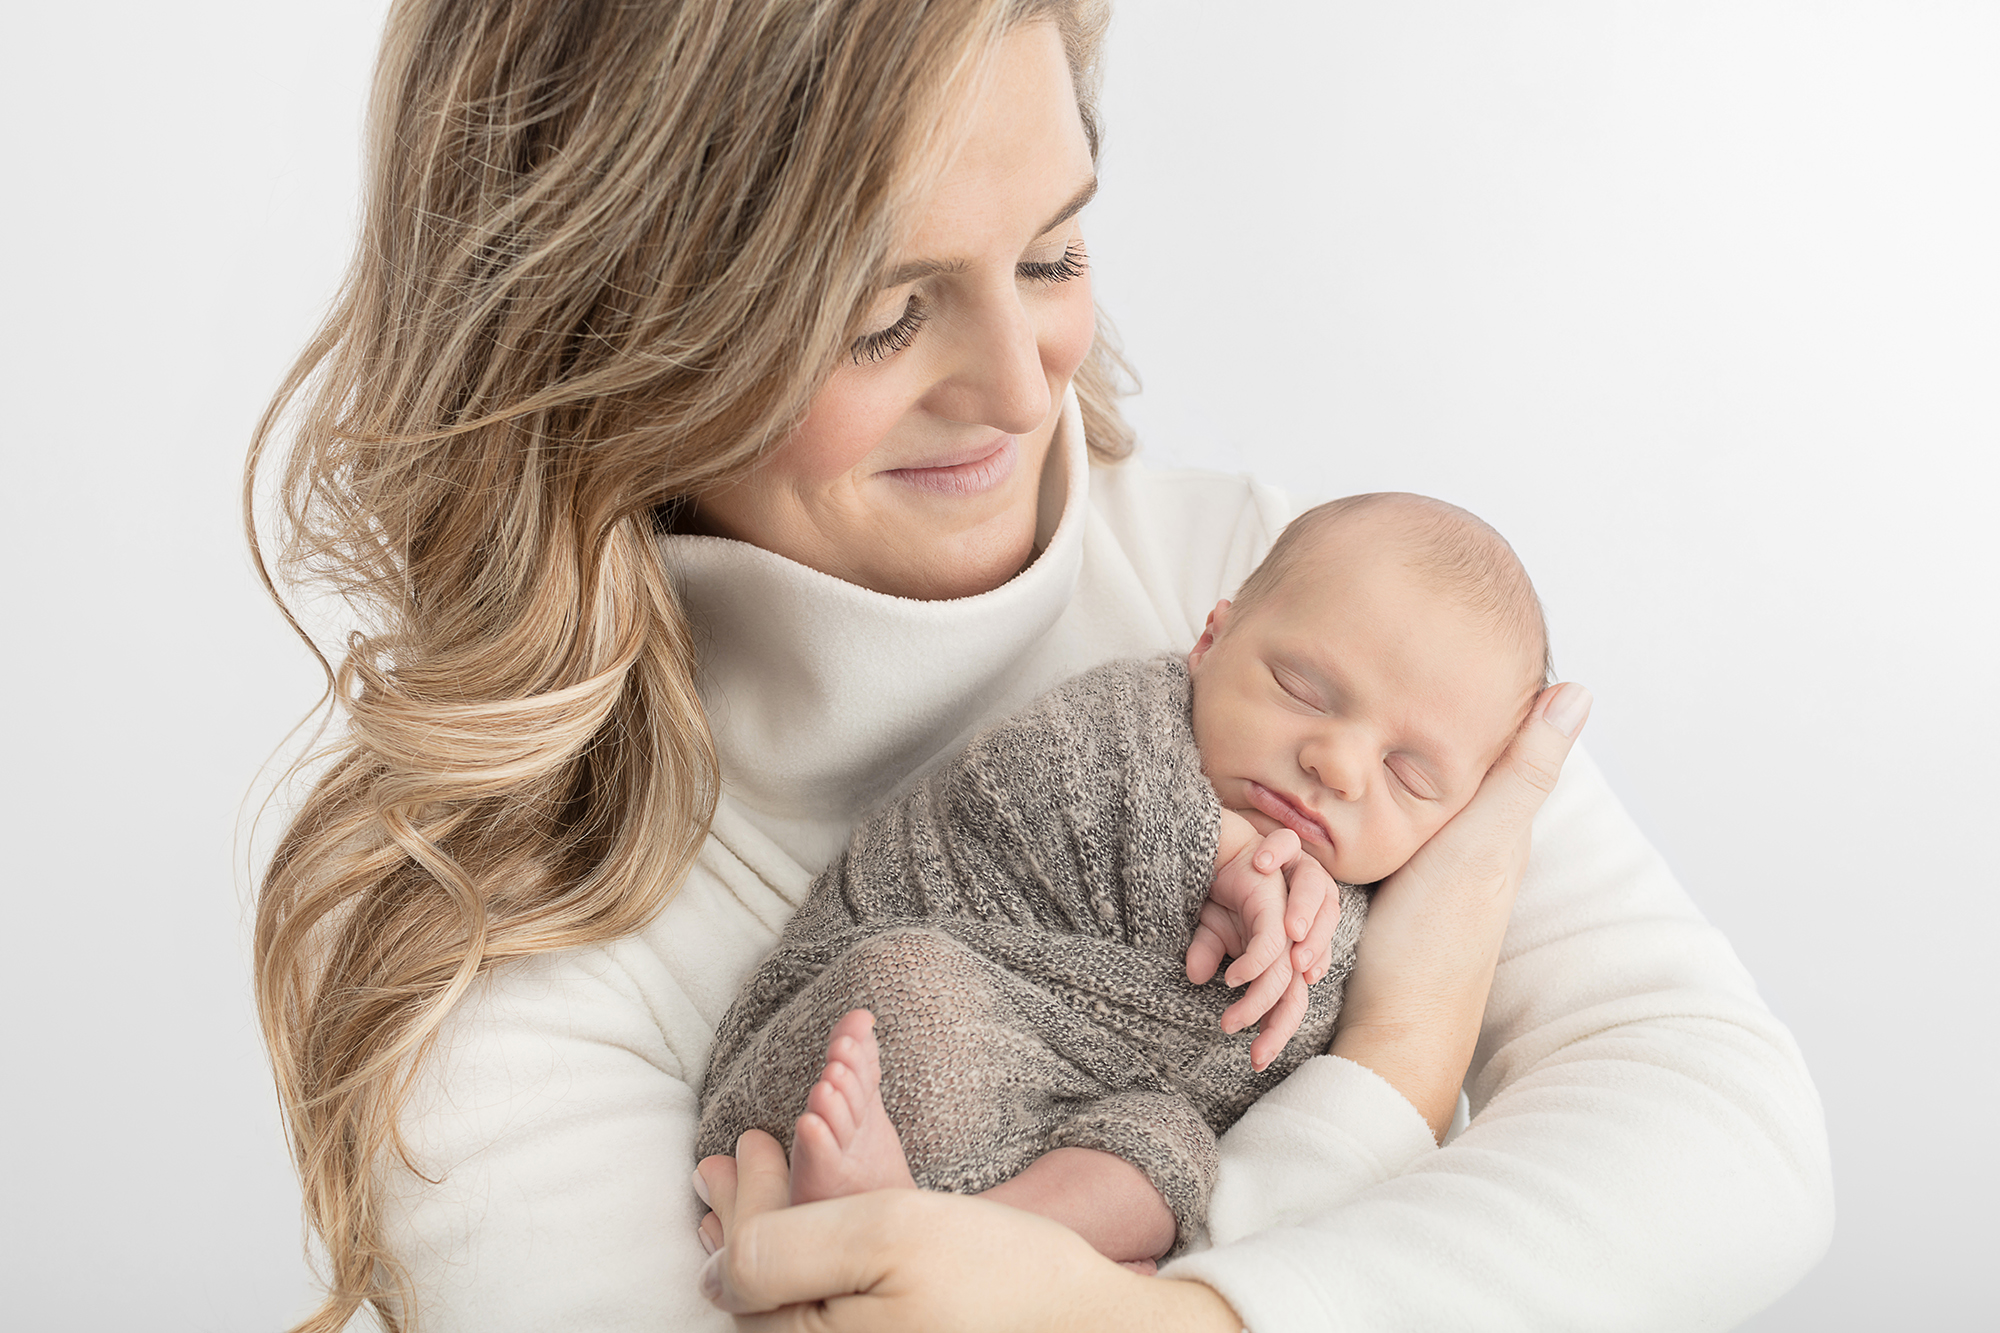 smiling mother with long dimensional blonde hair cradling her newborn who is wrapped in a loose knit gray blanket